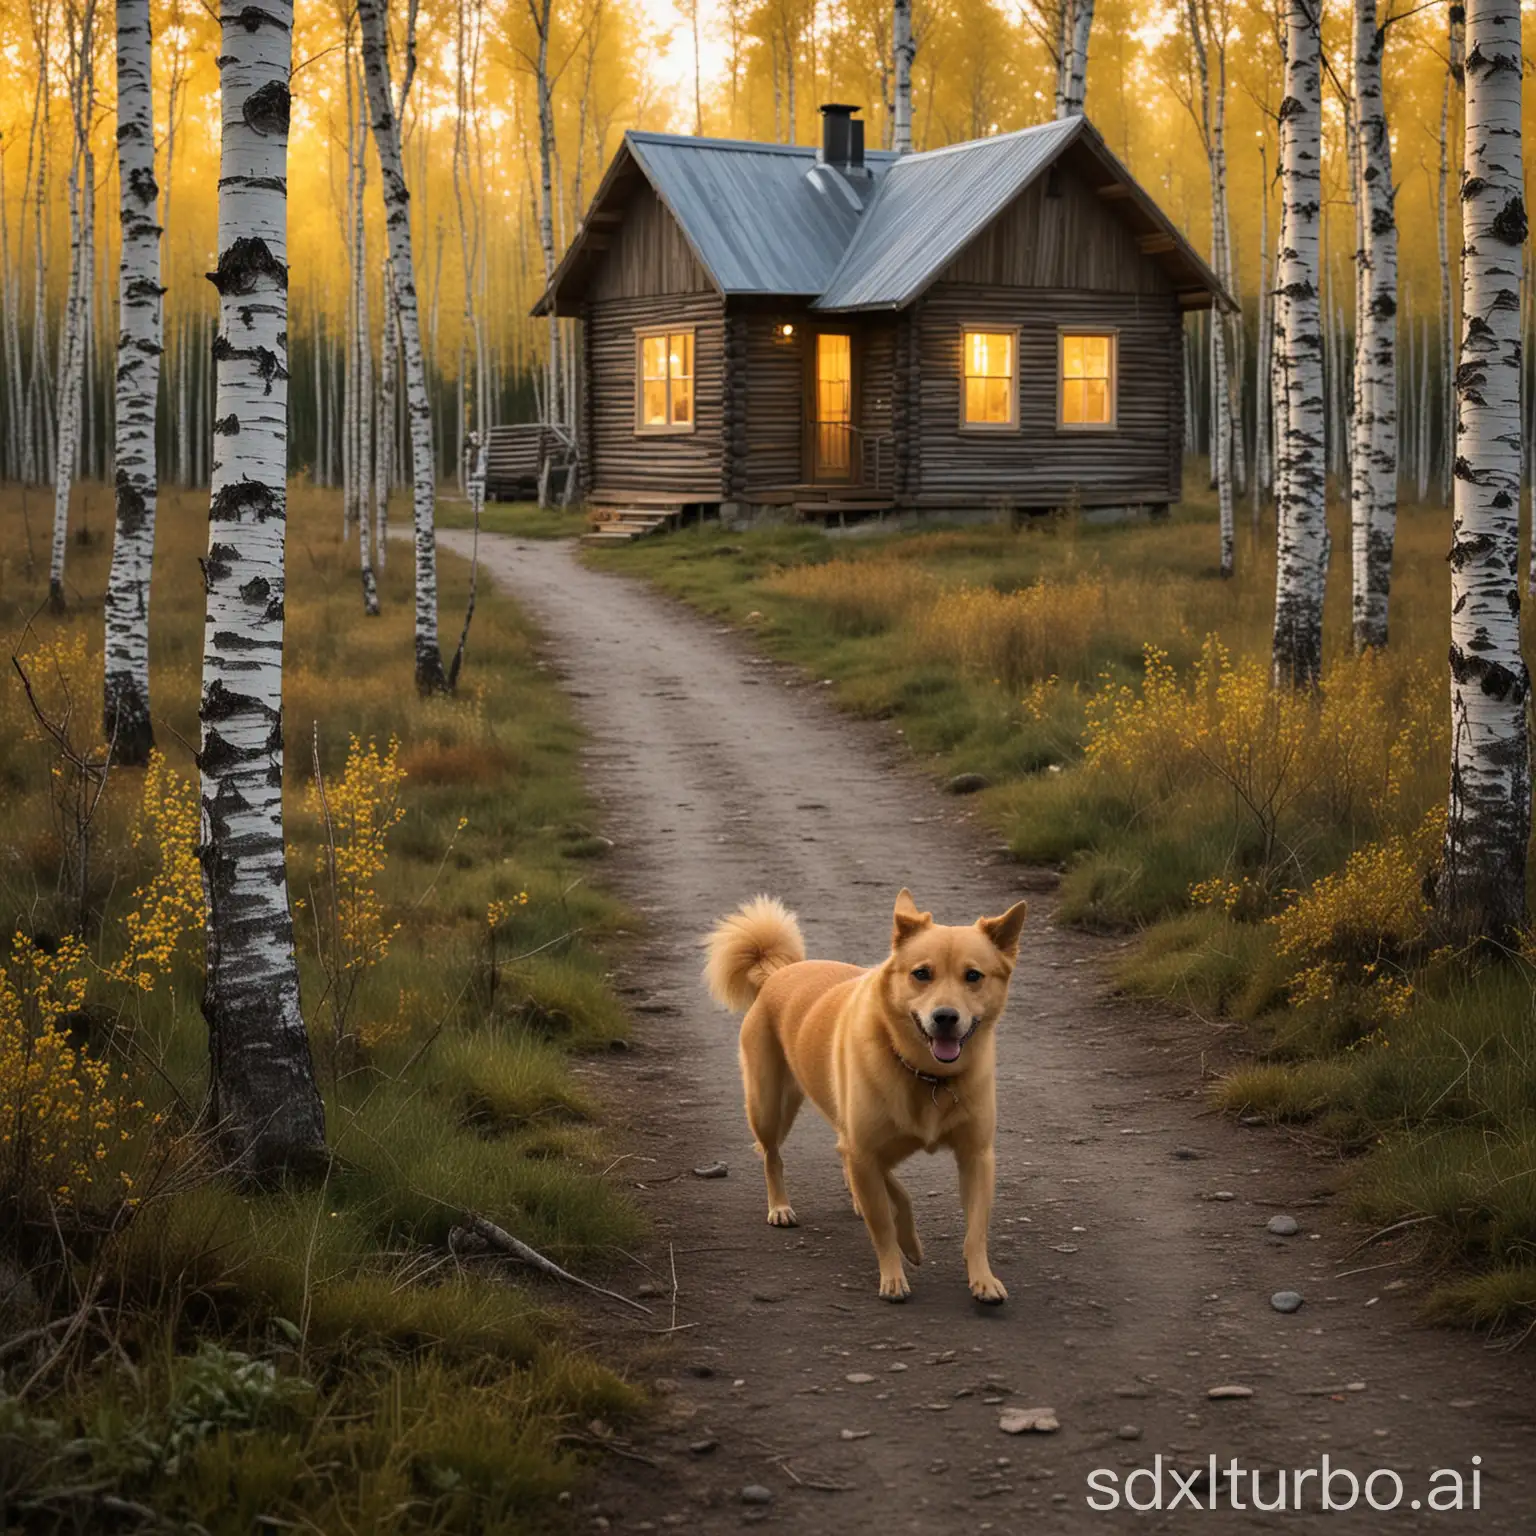 As twilight falls, in the birch forest, a little yellow dog runs towards a girl by the cabin, as if carrying light with it.